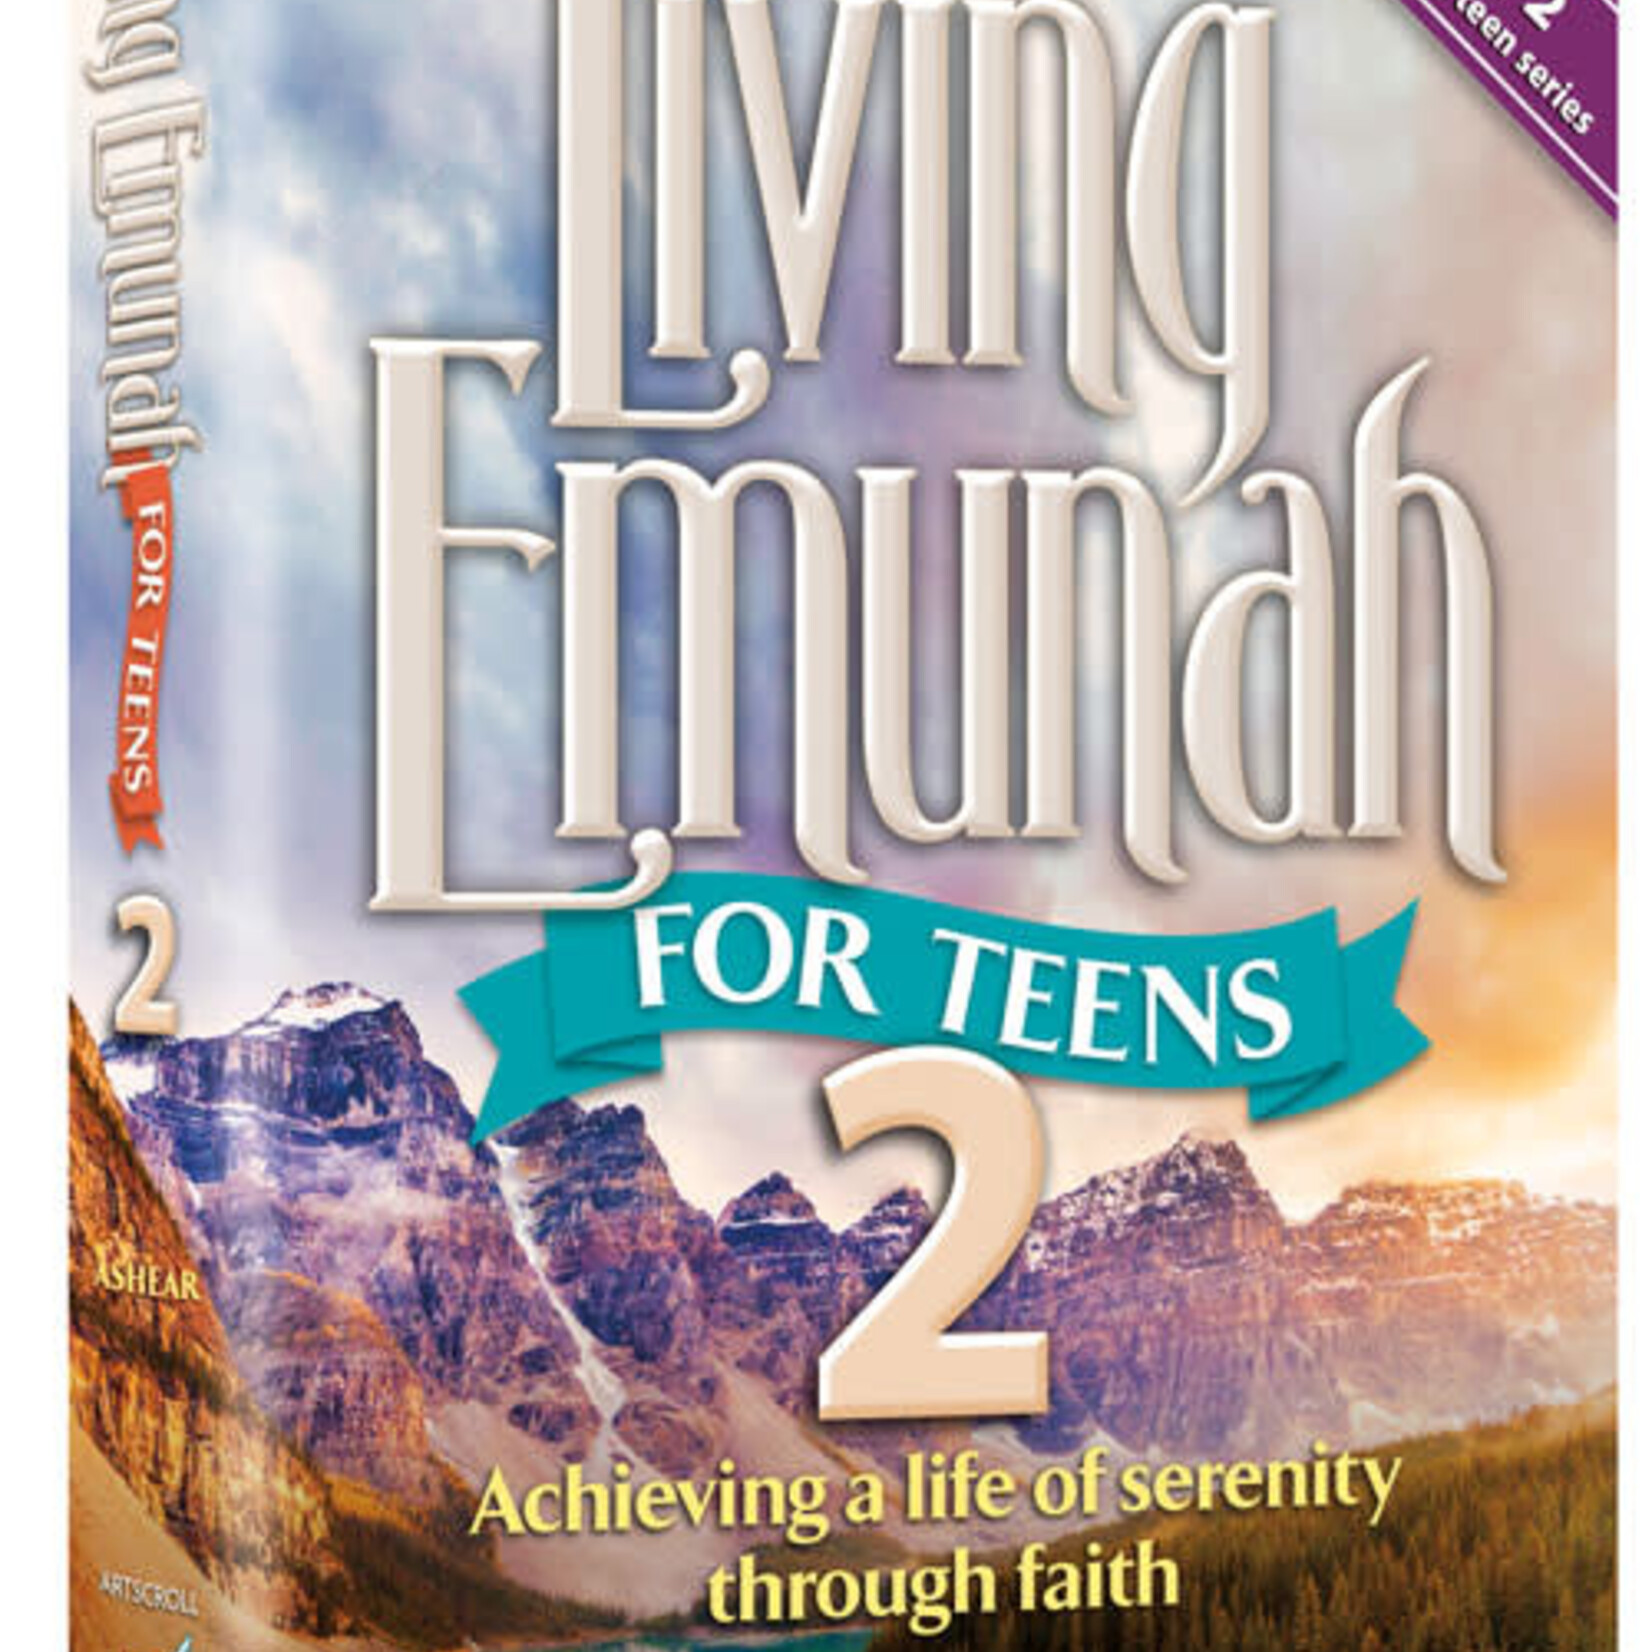 Living Emunah for Teens Vol. 2 - The Alon Family Edition (Vol 2. Full Size Hardcover) Achieving A Life of Serenity Through Faith